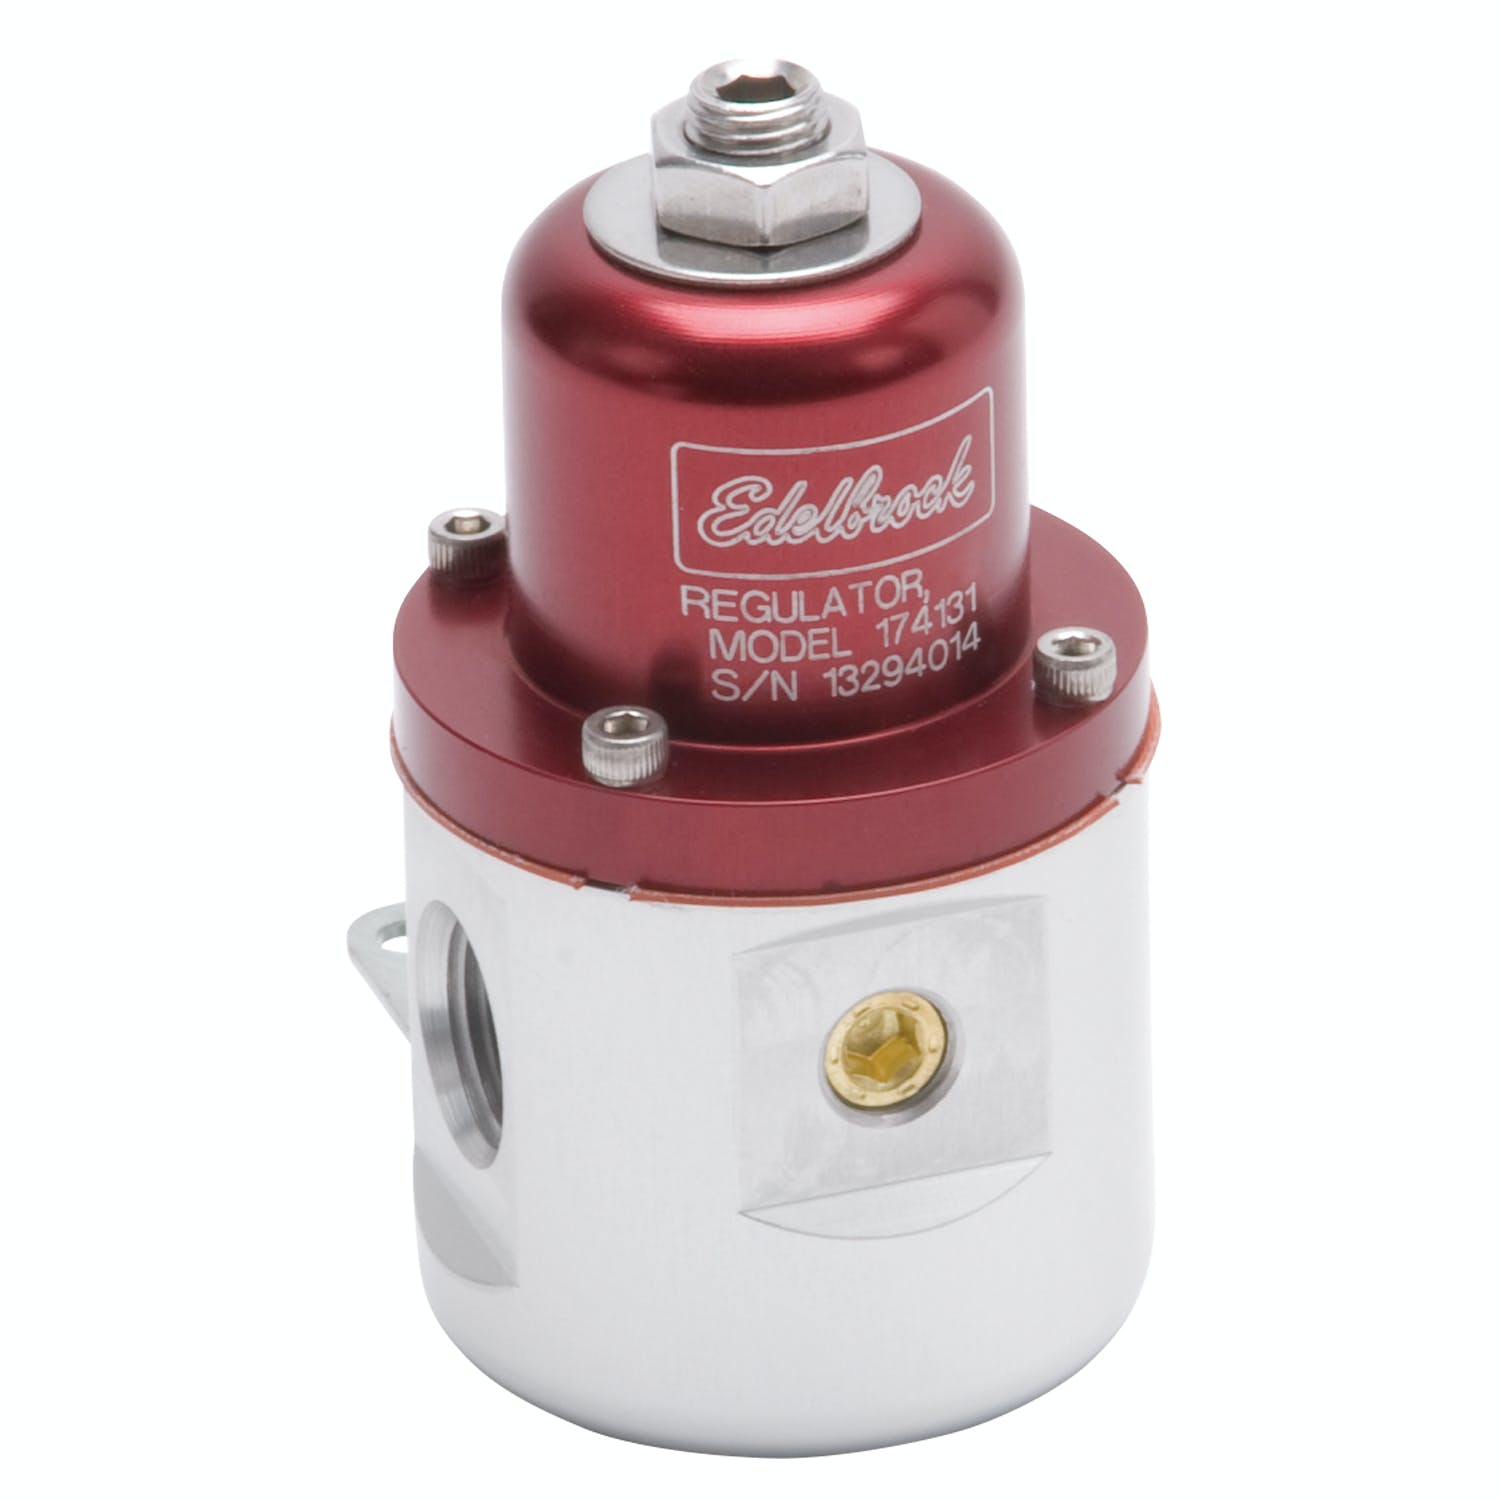 Edelbrock 174131 REGULATOR CARB FUEL PRESSURE 3/8 Npt INLET/OUTLET RED/CLEAR BODY ANODIZED FINISH